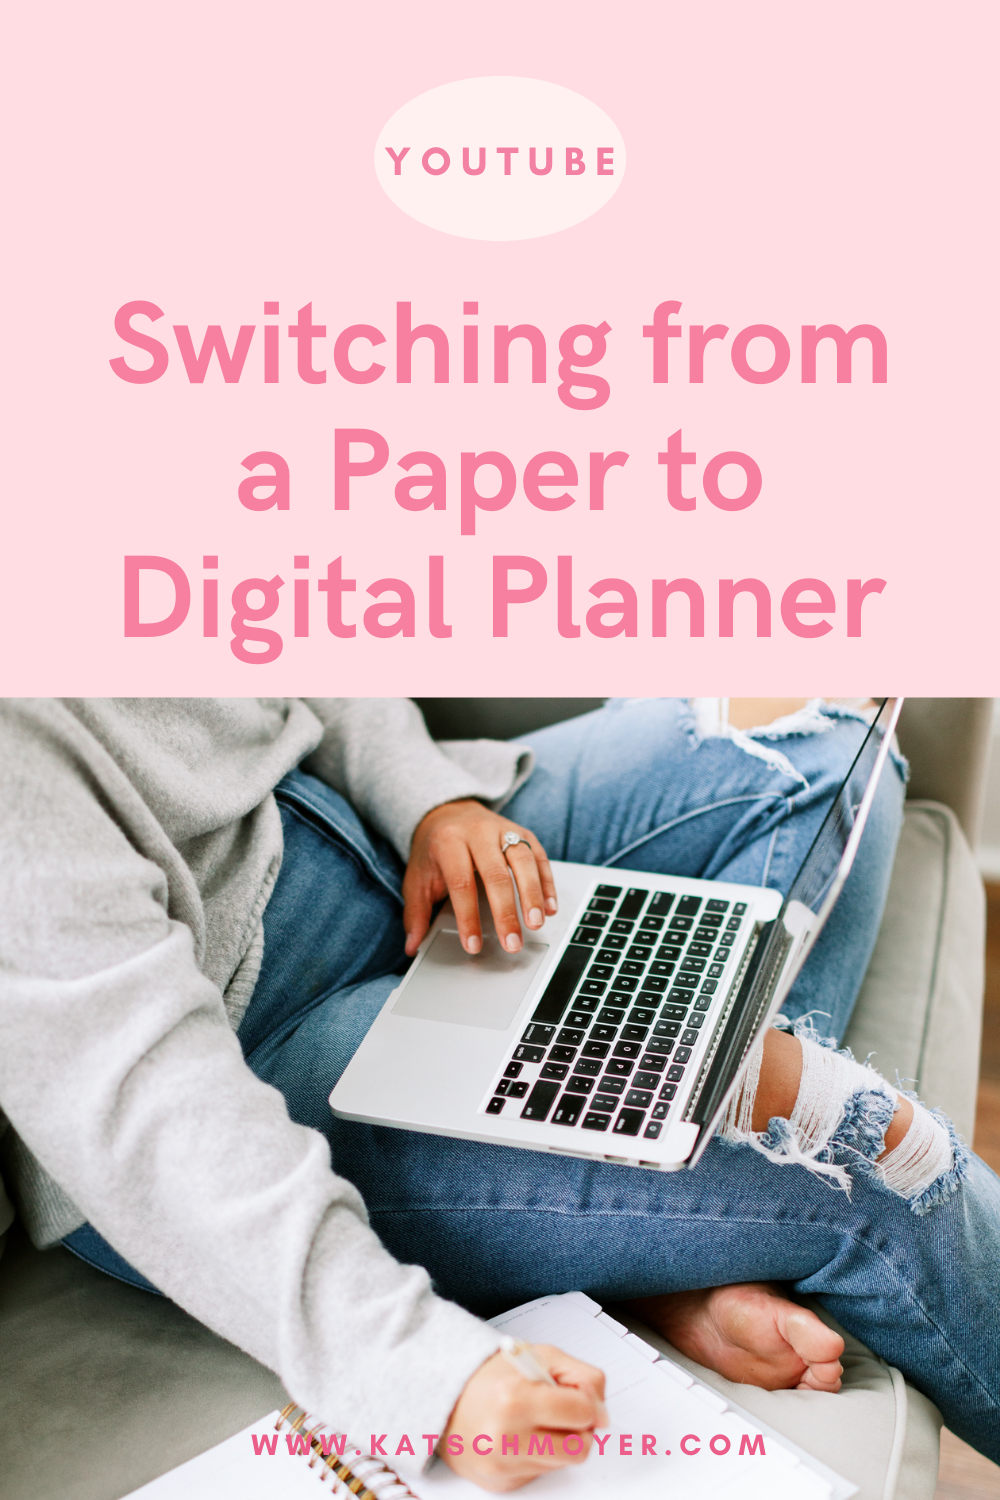 Switching from Paper to Digital Planner